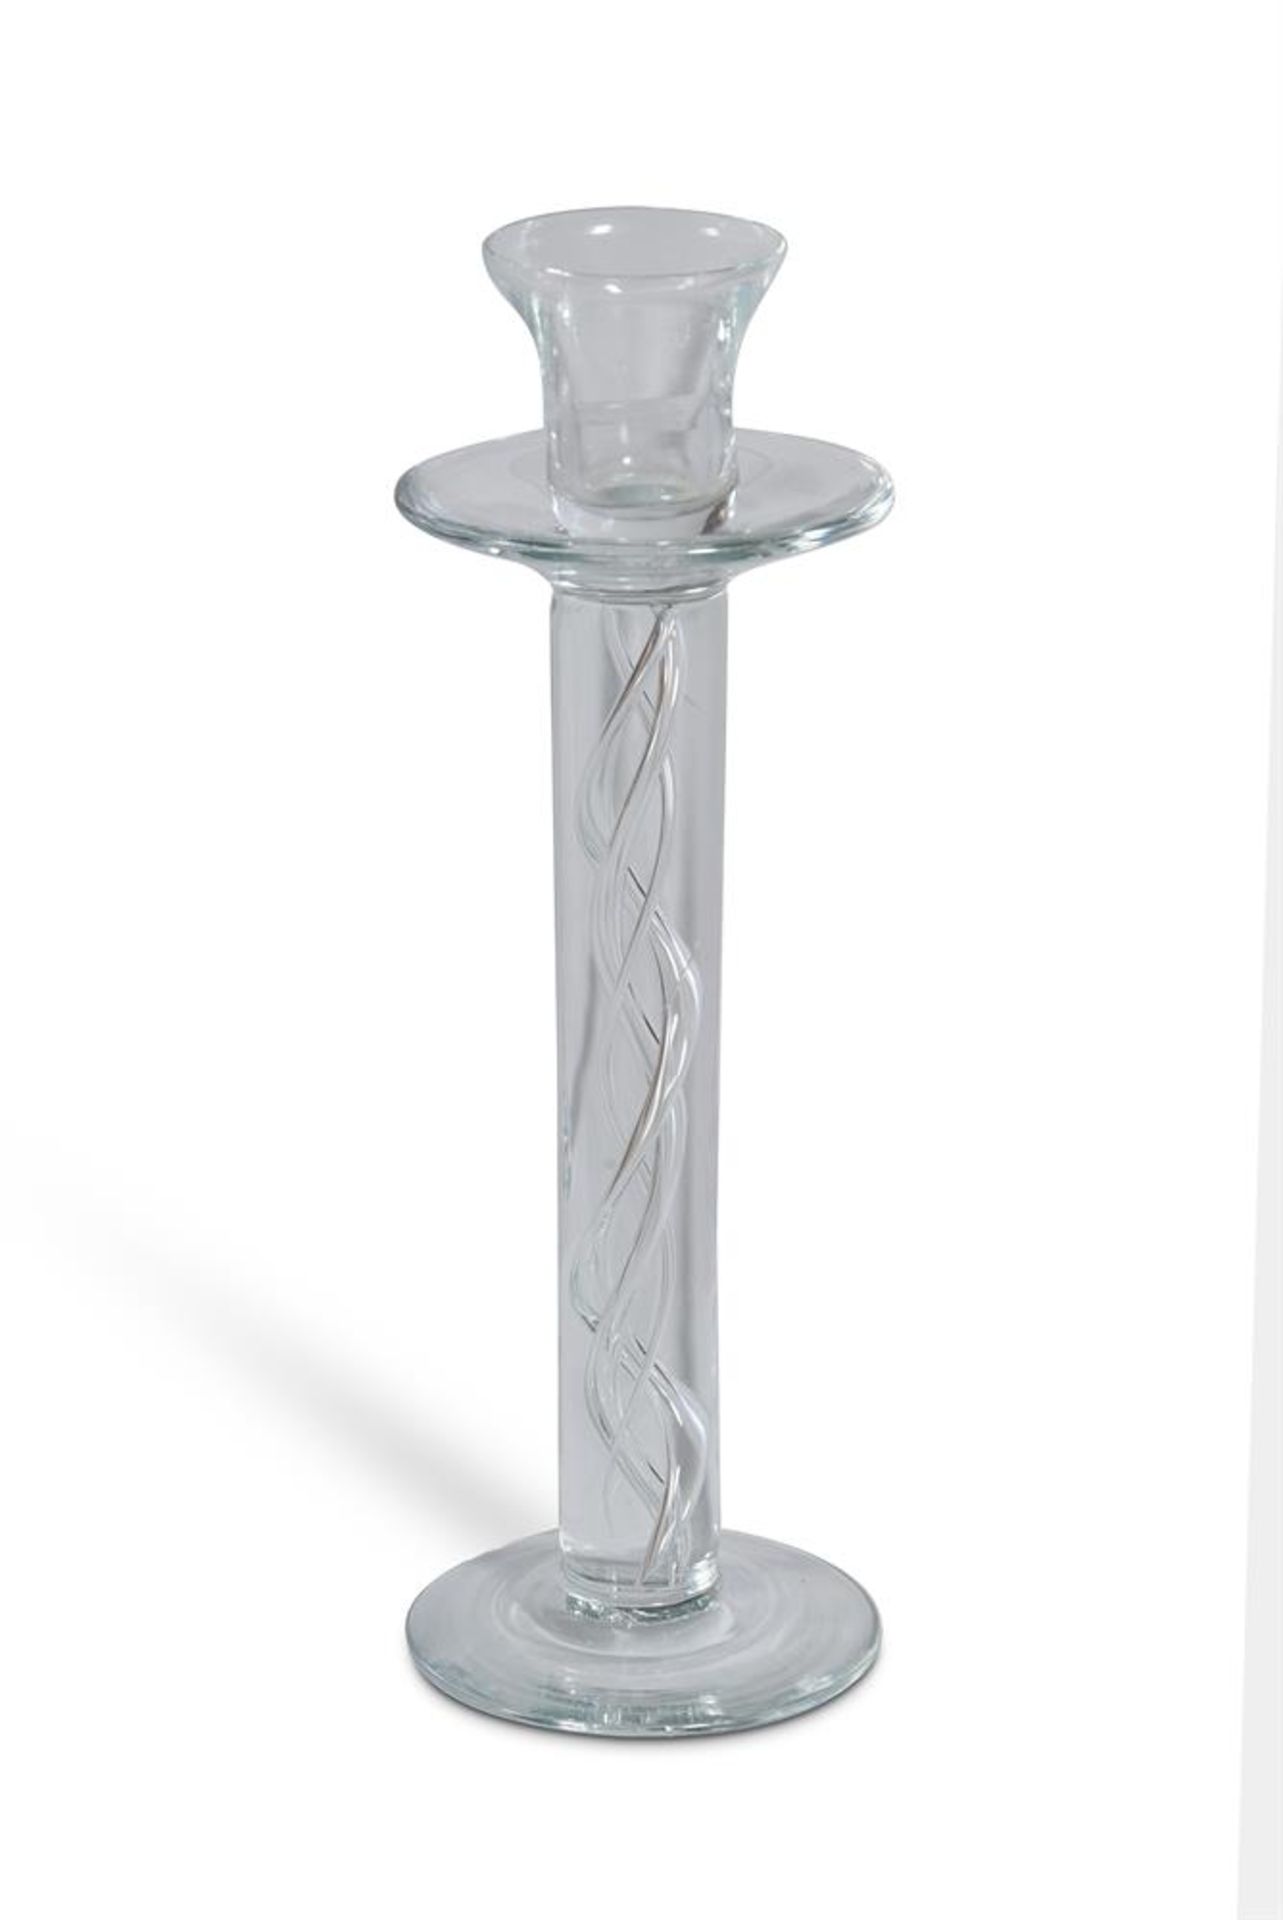 A PAIR OF CLEAR GLASS AIR TWIST STEMMED COLUMNAR CANDLESTICKS - Image 2 of 2